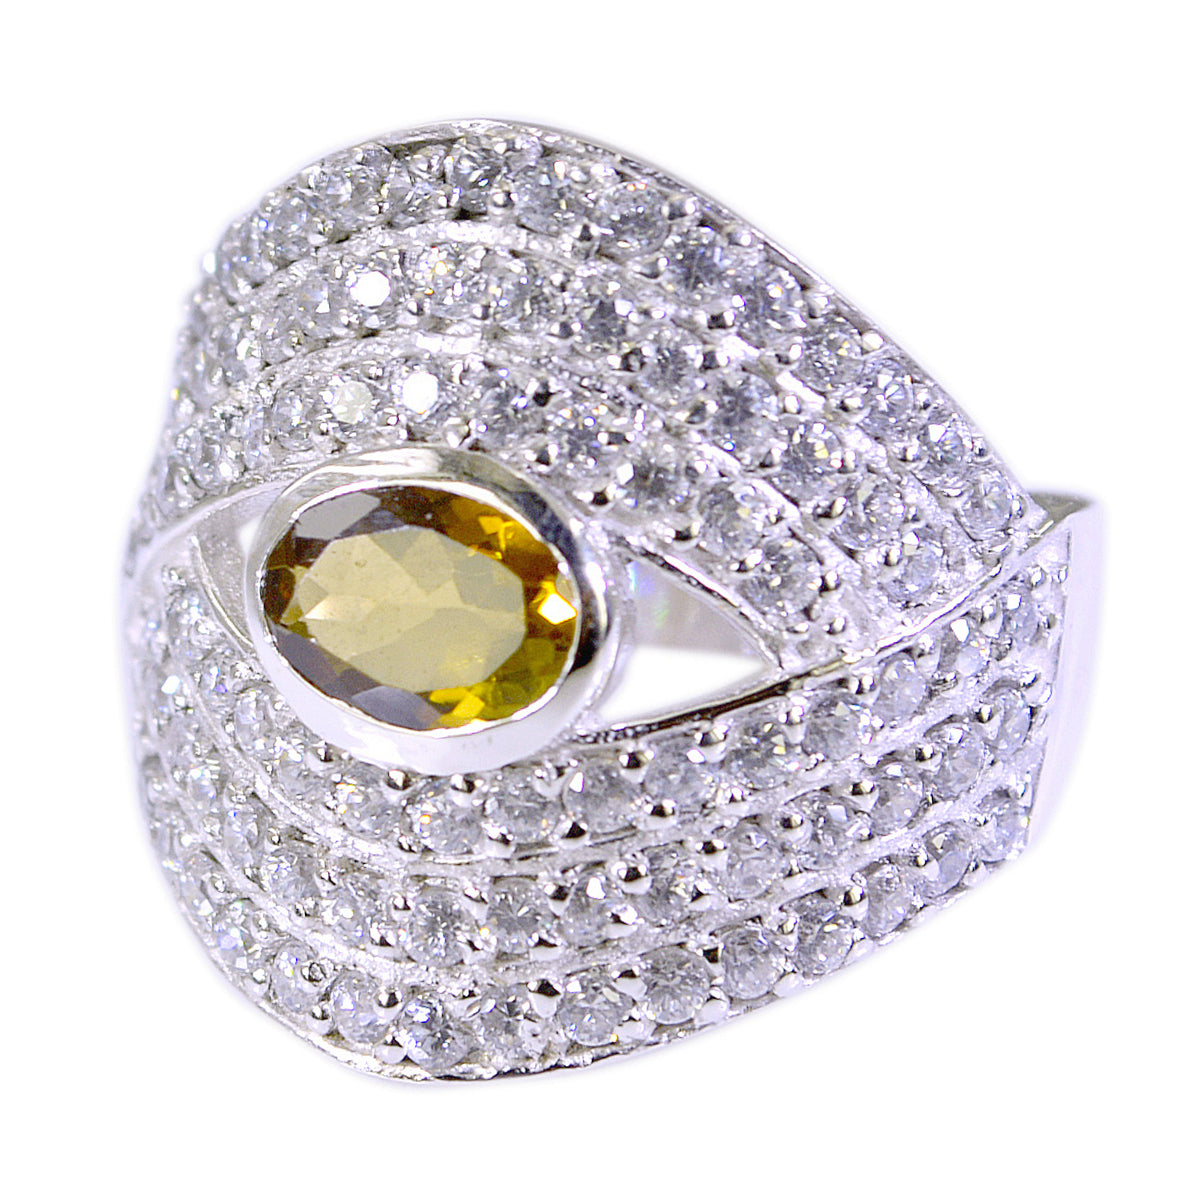 Gorgeous Gem Citrine 925 Sterling Silver Ring Travel Jewelry Organizer